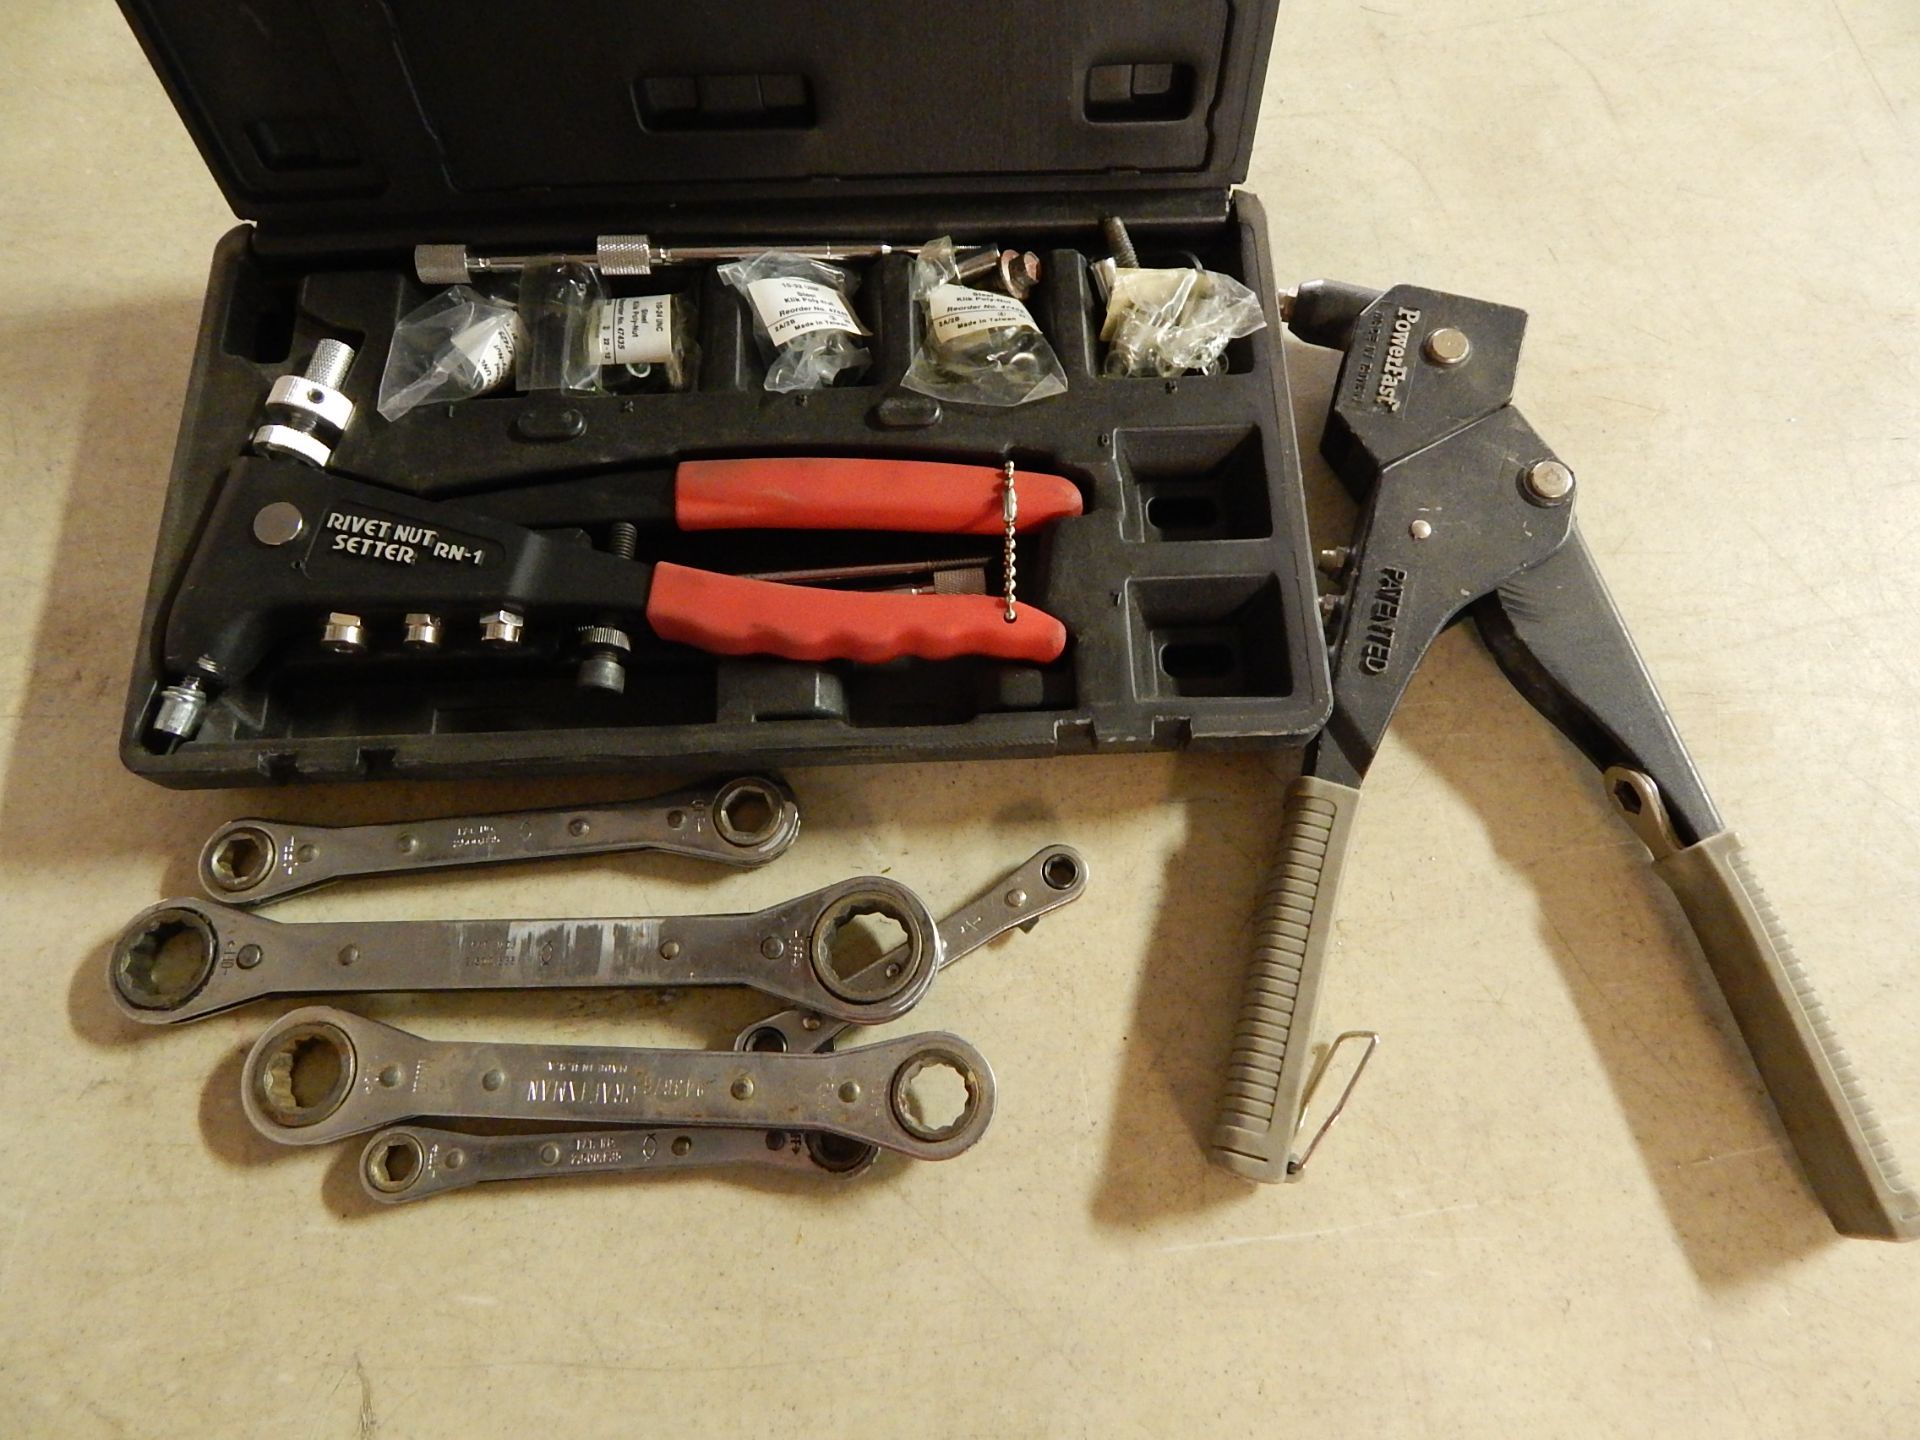 Pop Rivet Tools and Ratchet Wrenches